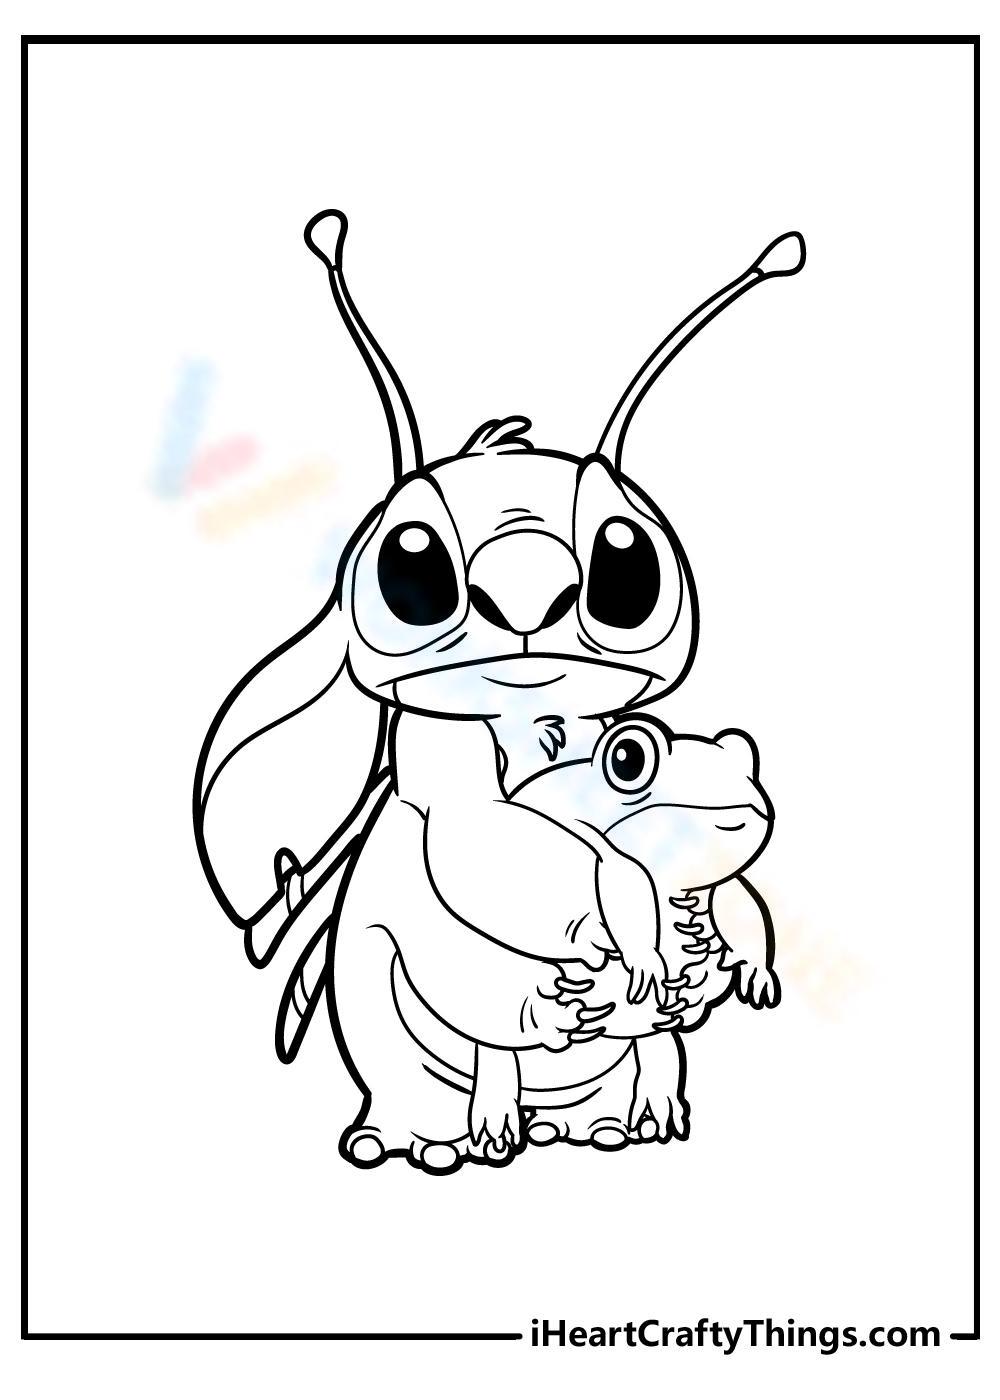 Free Printable Lilo & Stitch Coloring Pages - Worksheet Zone